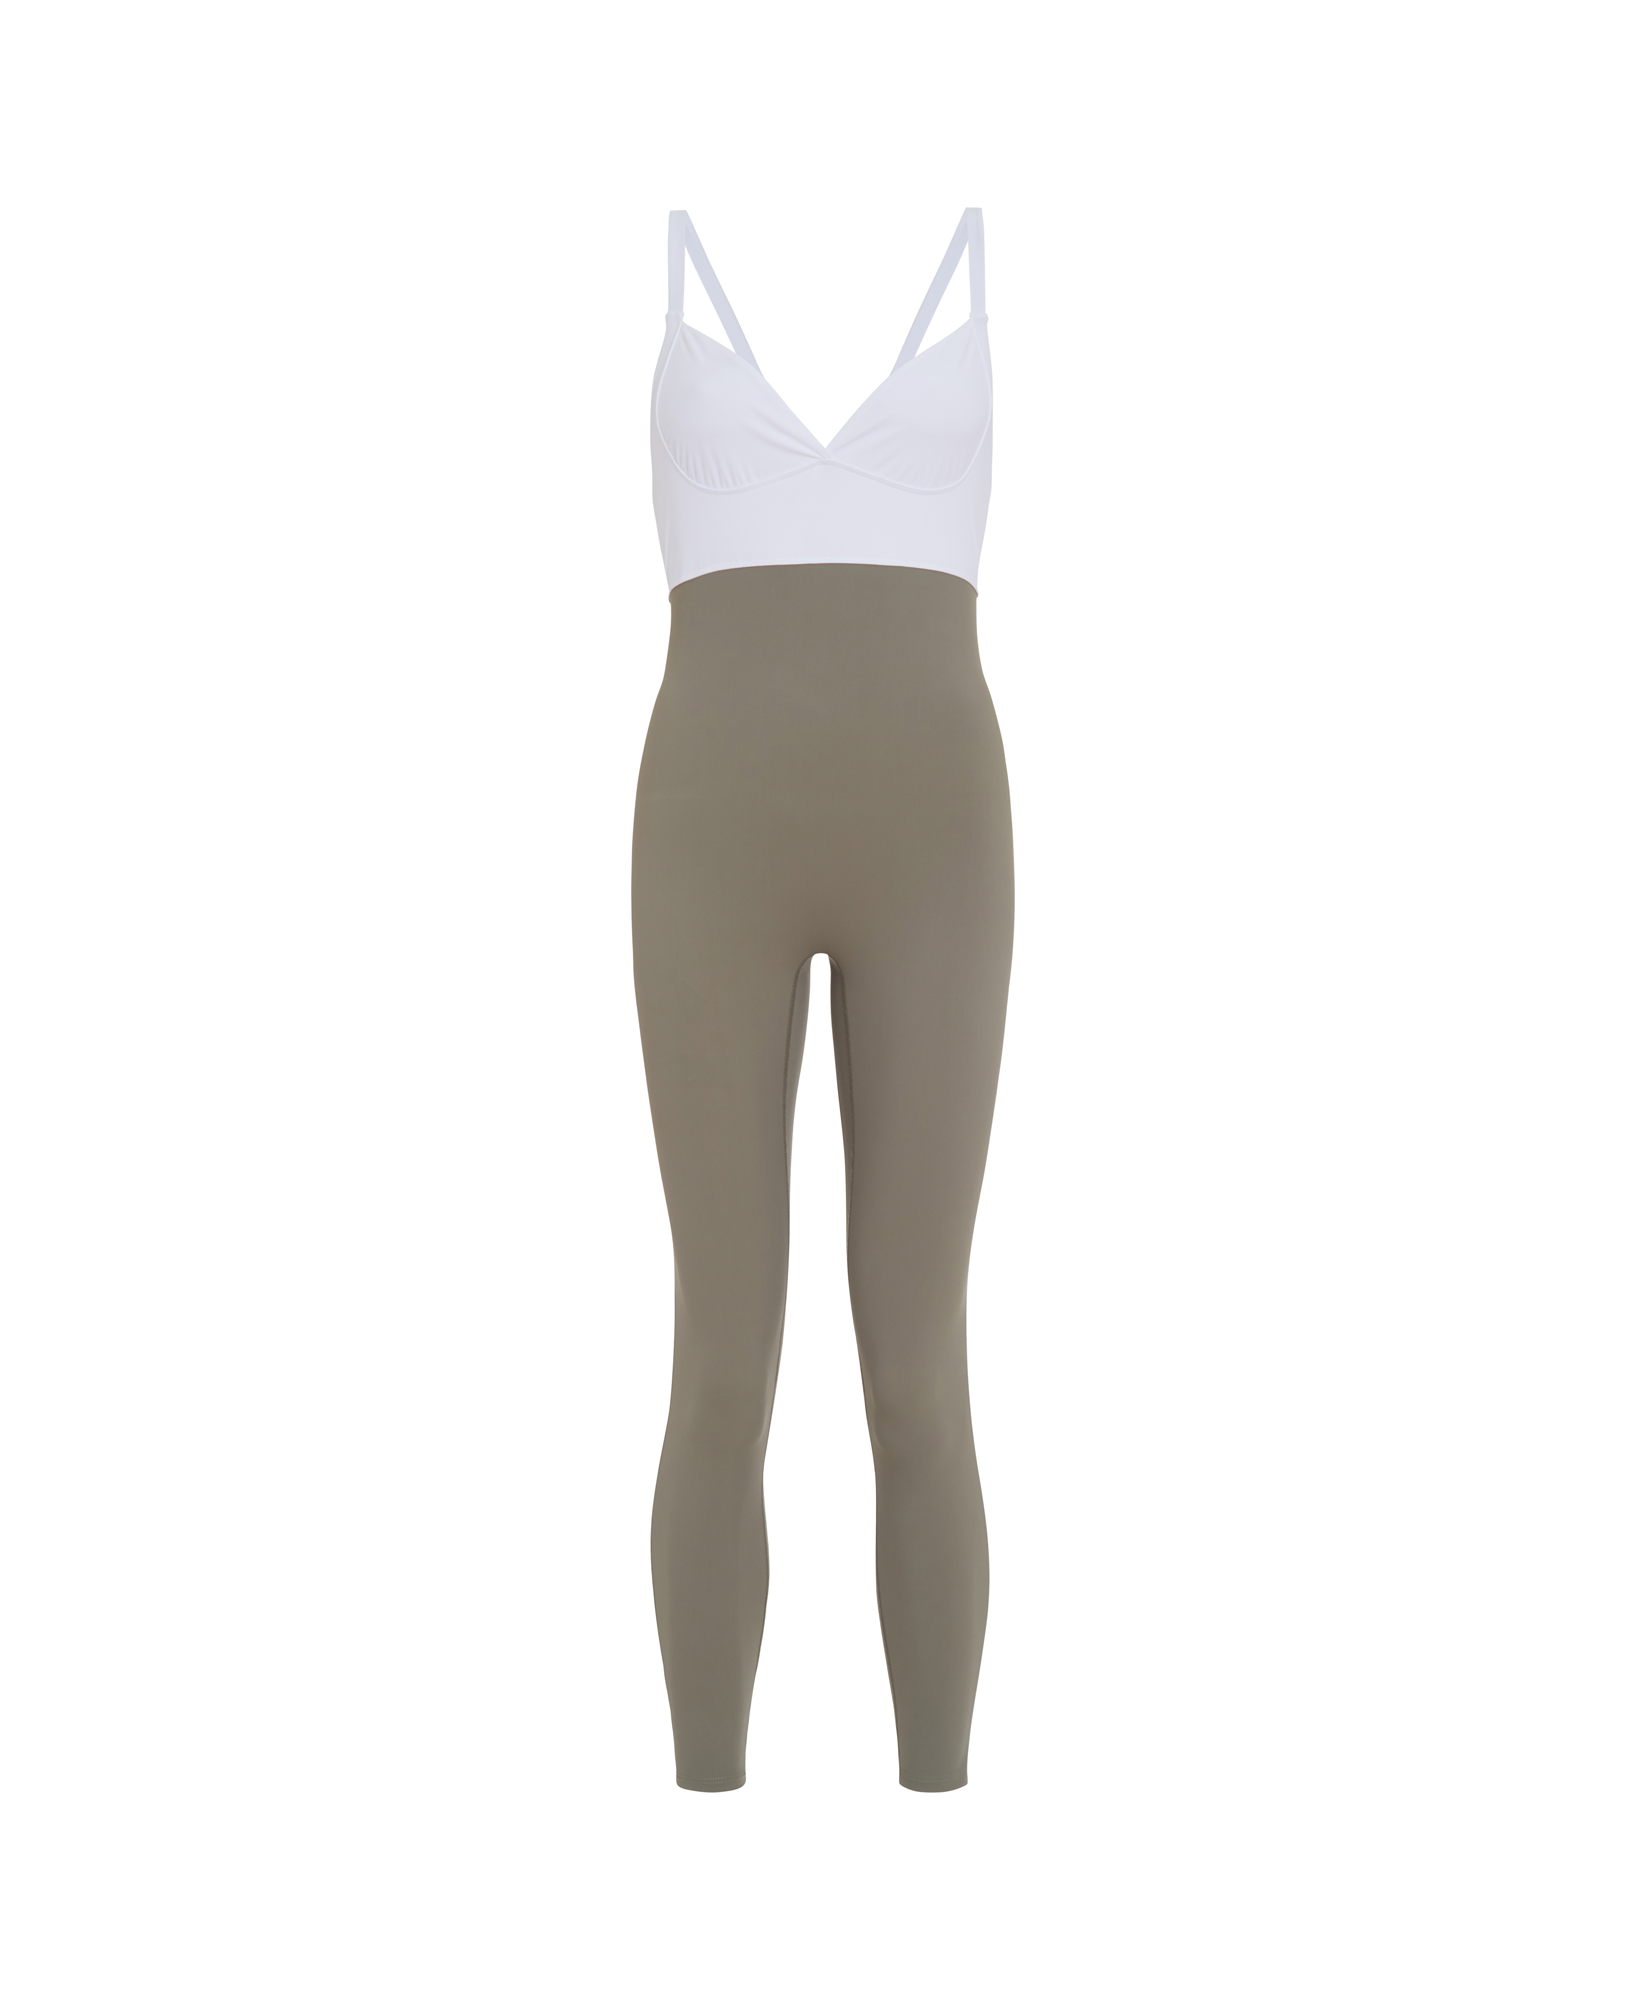 Wear One's At on Instagram: The Contour Unitard- Delicate style